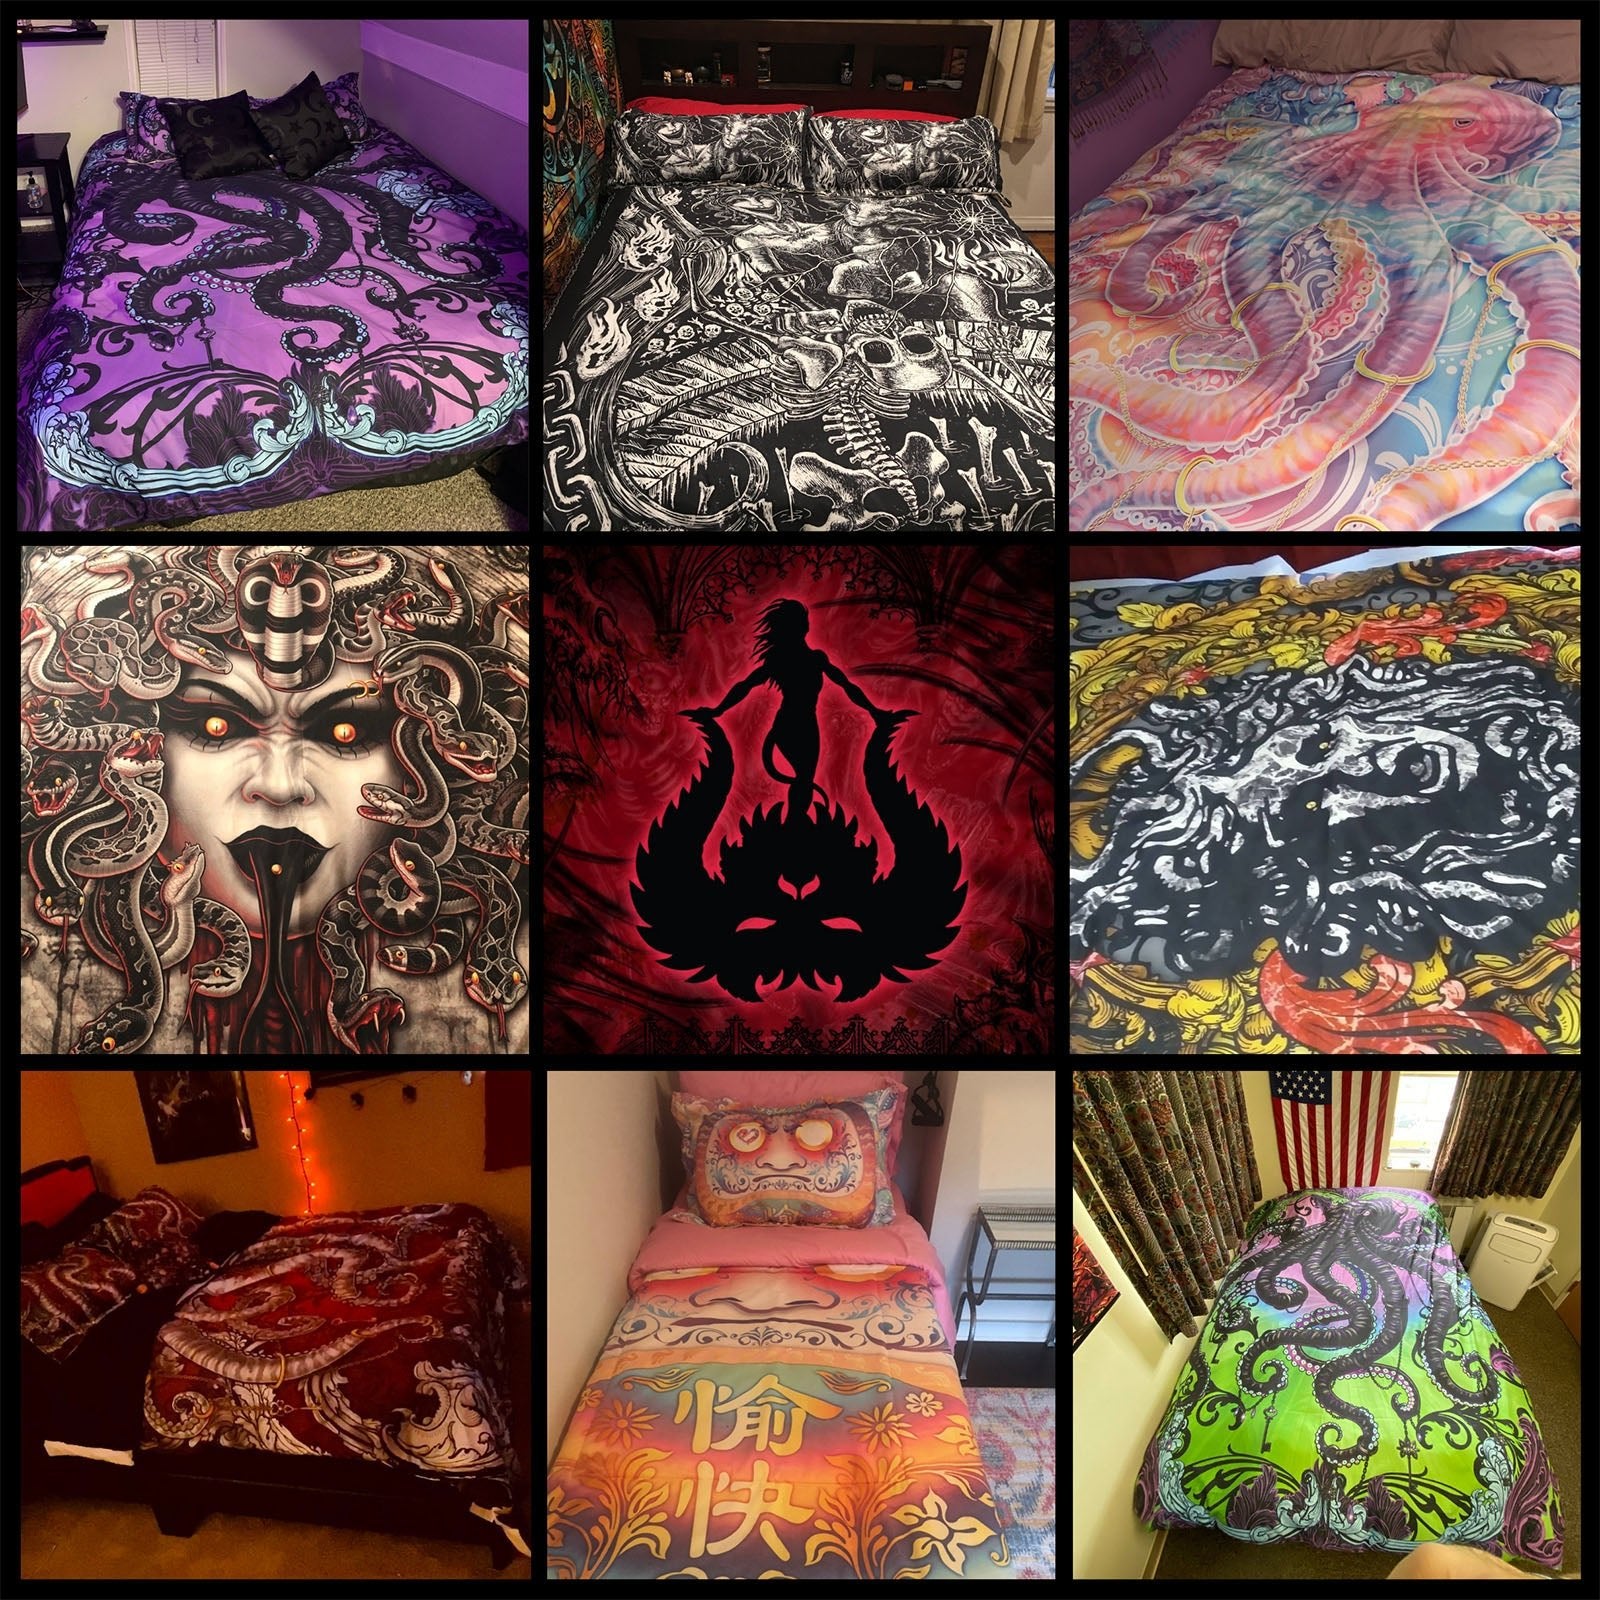 Horror Bedding Set, Comforter and Duvet, Medusa Skull, Halloween Bed Cover and Bedroom Decor, King, Queen and Twin Size - 3 Faces - Abysm Internal